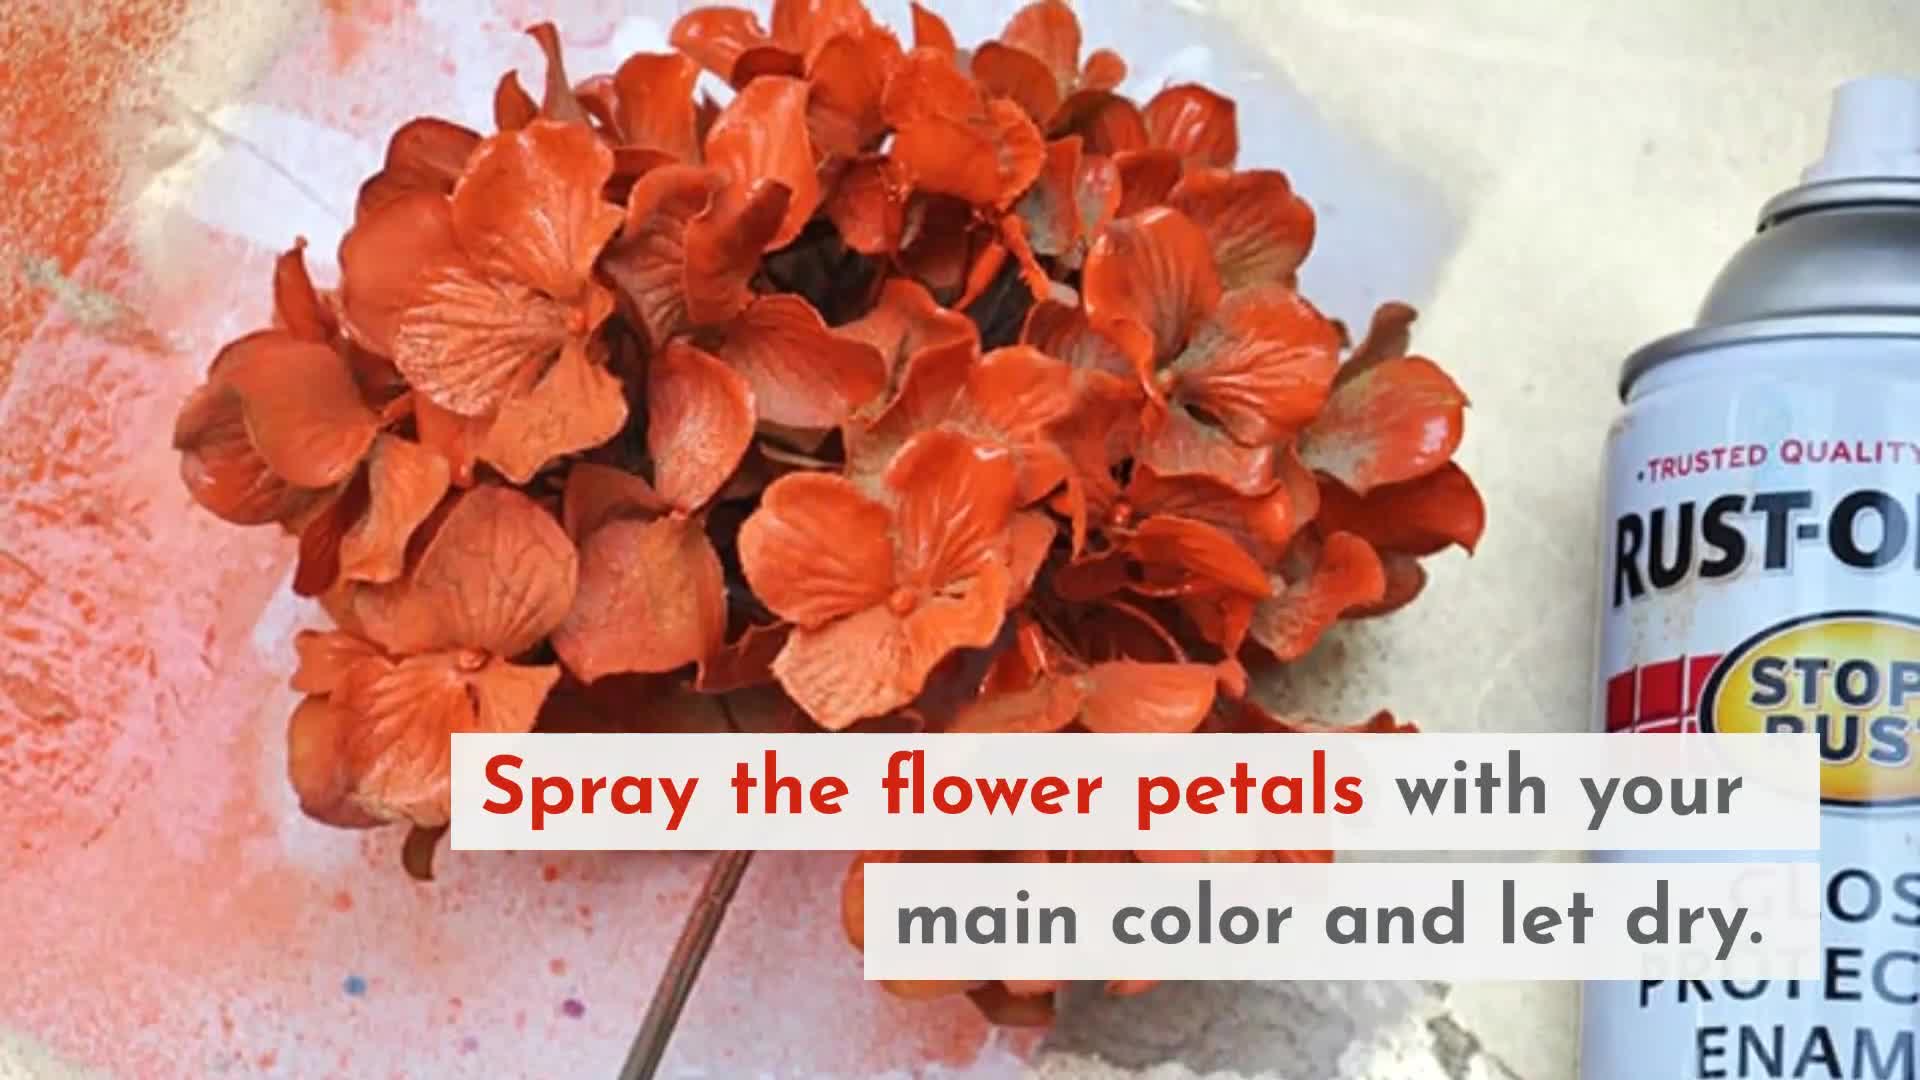 My latest craft glue fake flowers on canvas & spray paint! Super fast &  easy to do